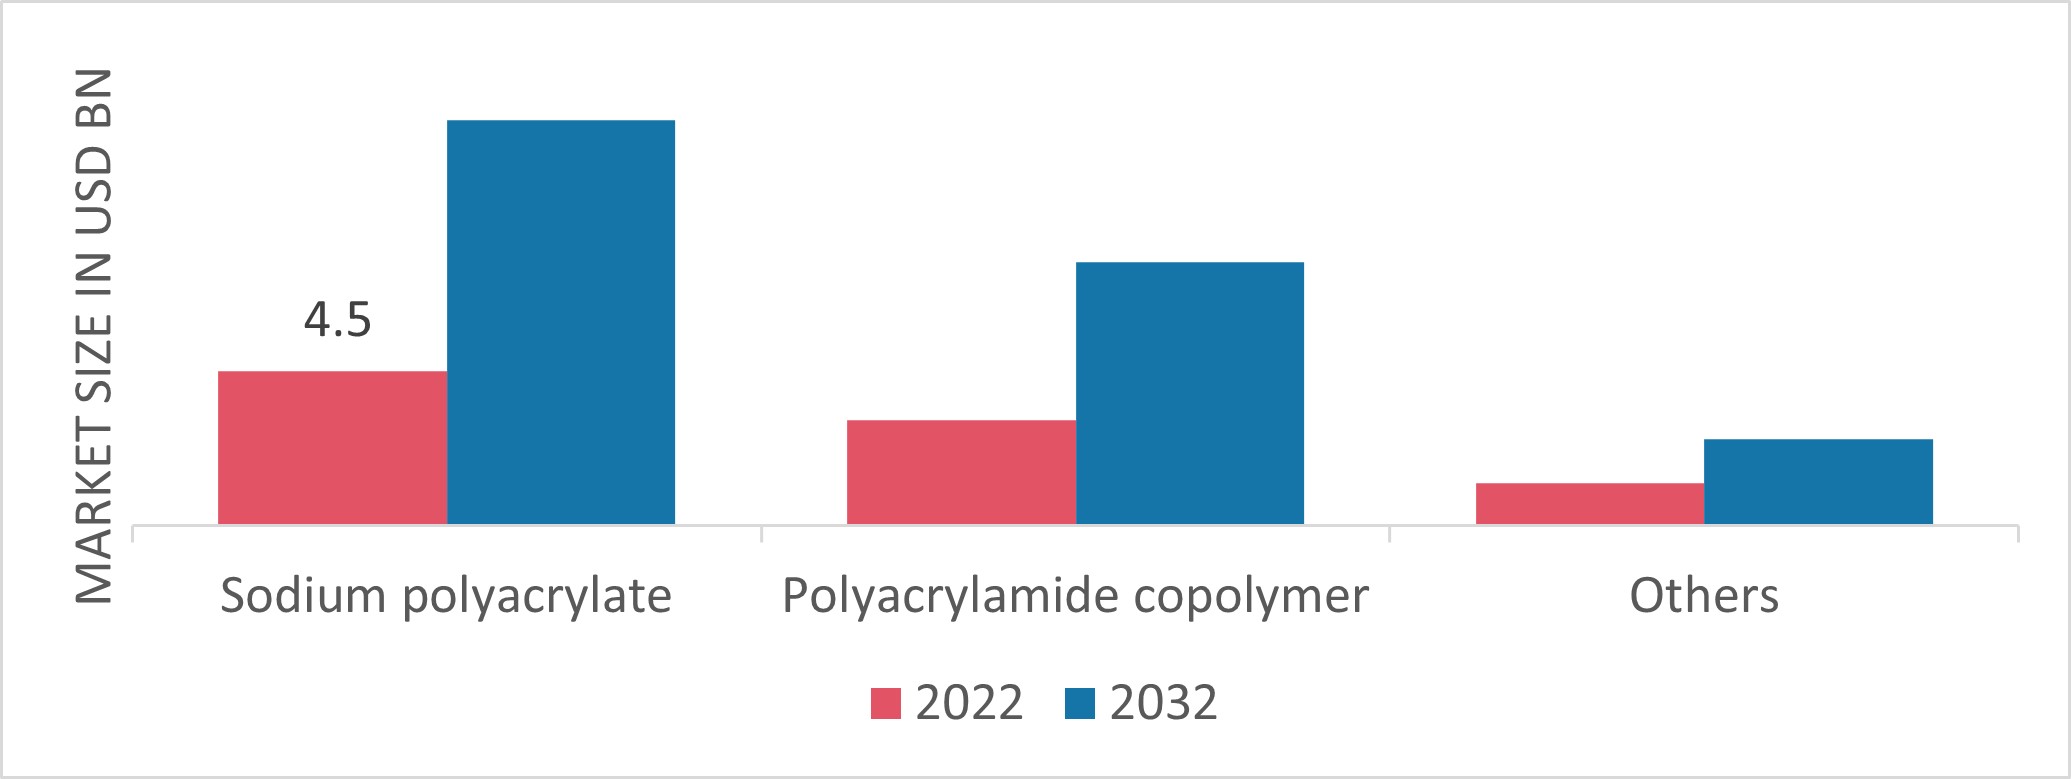 Superabsorbent Polymers Market, by Type, 2022 & 2032